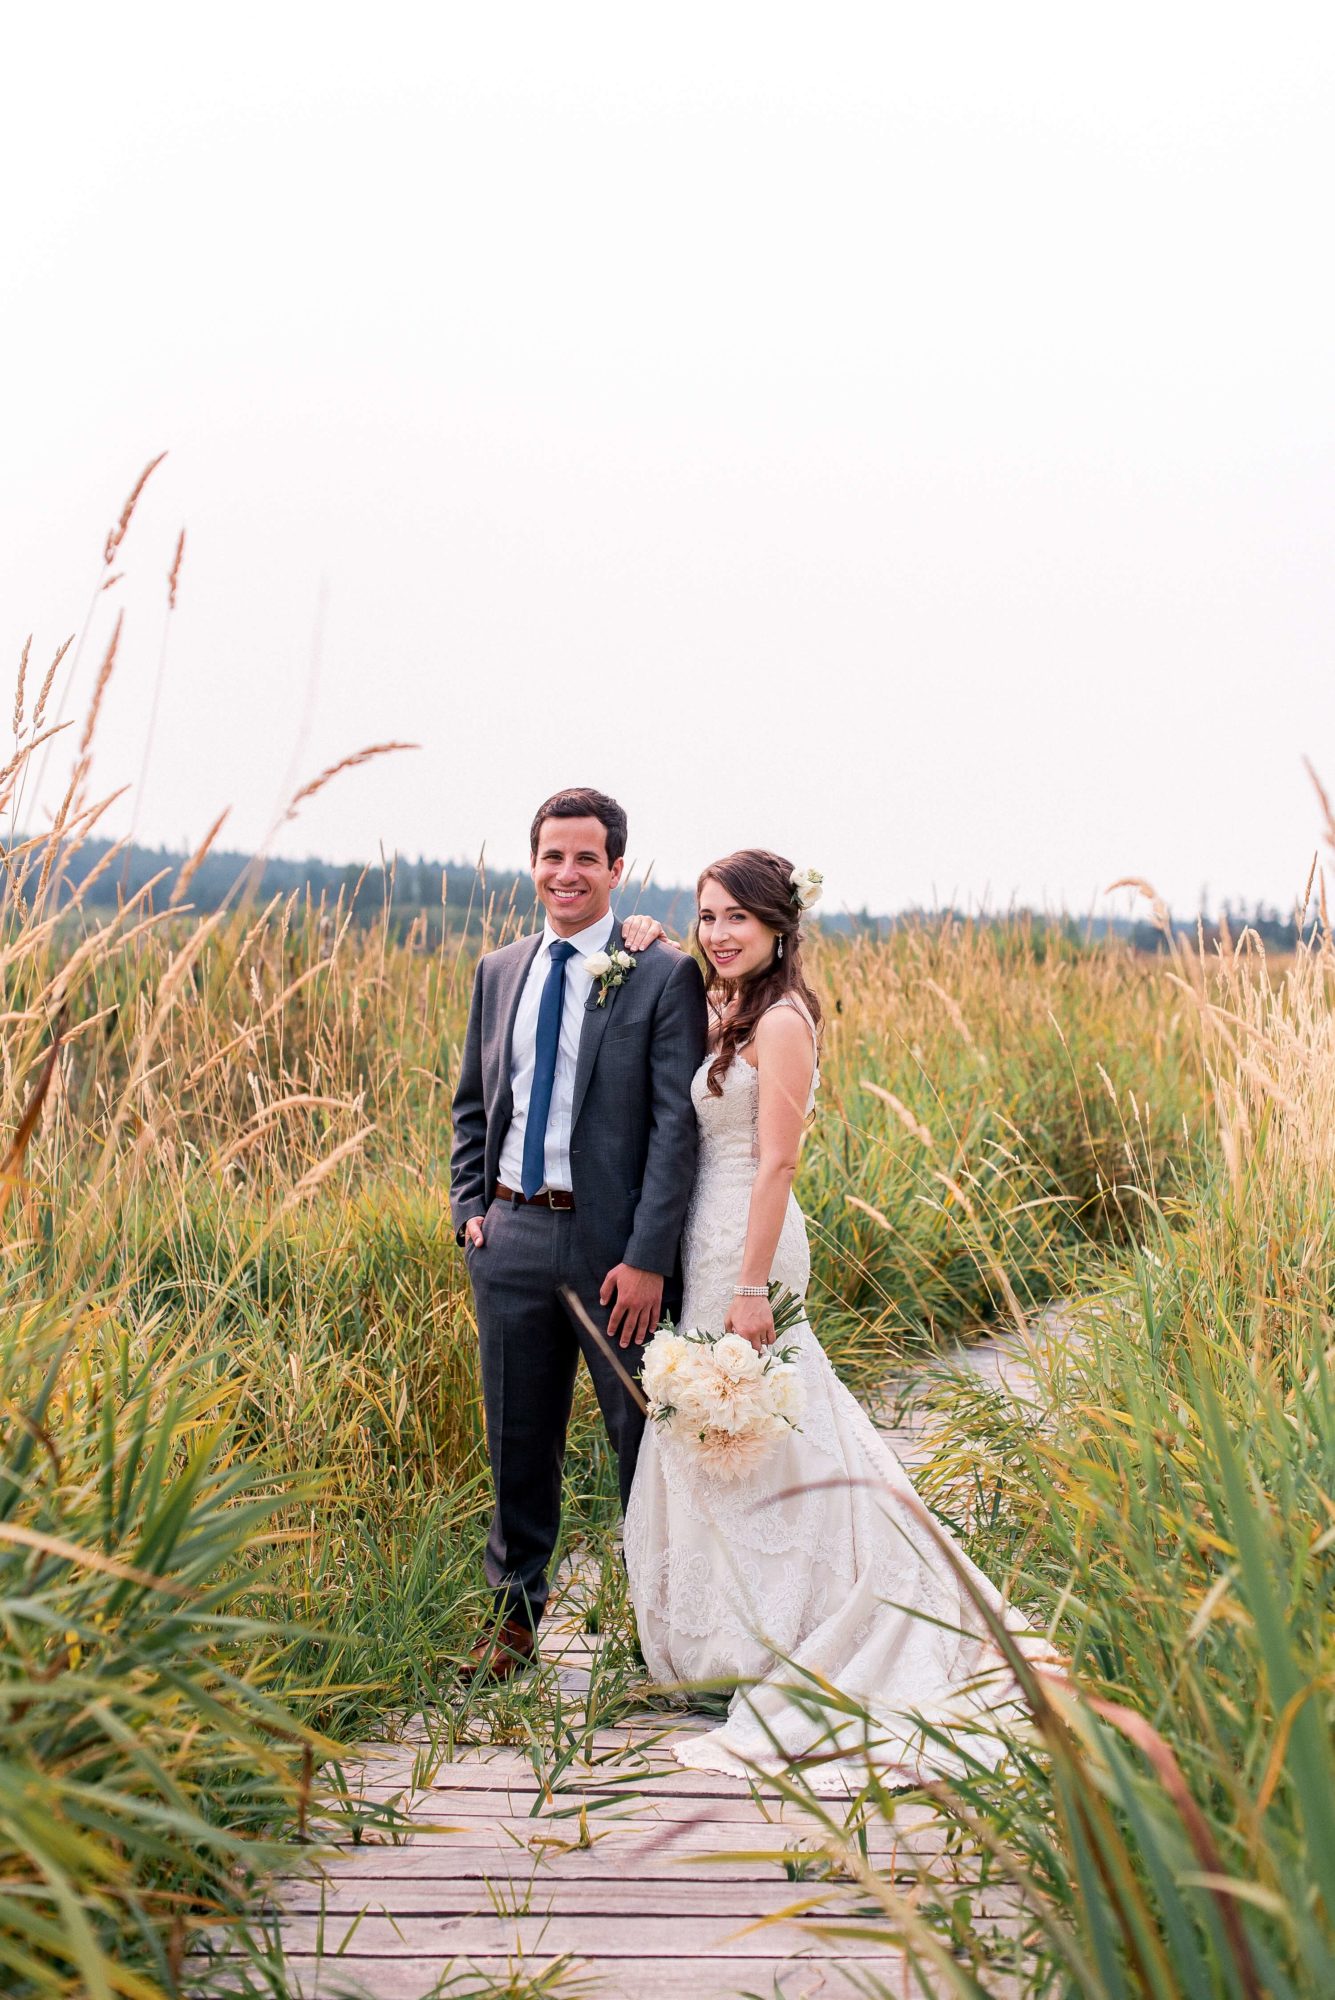 Bride and Groom on a boardwalk in a grassy marsh